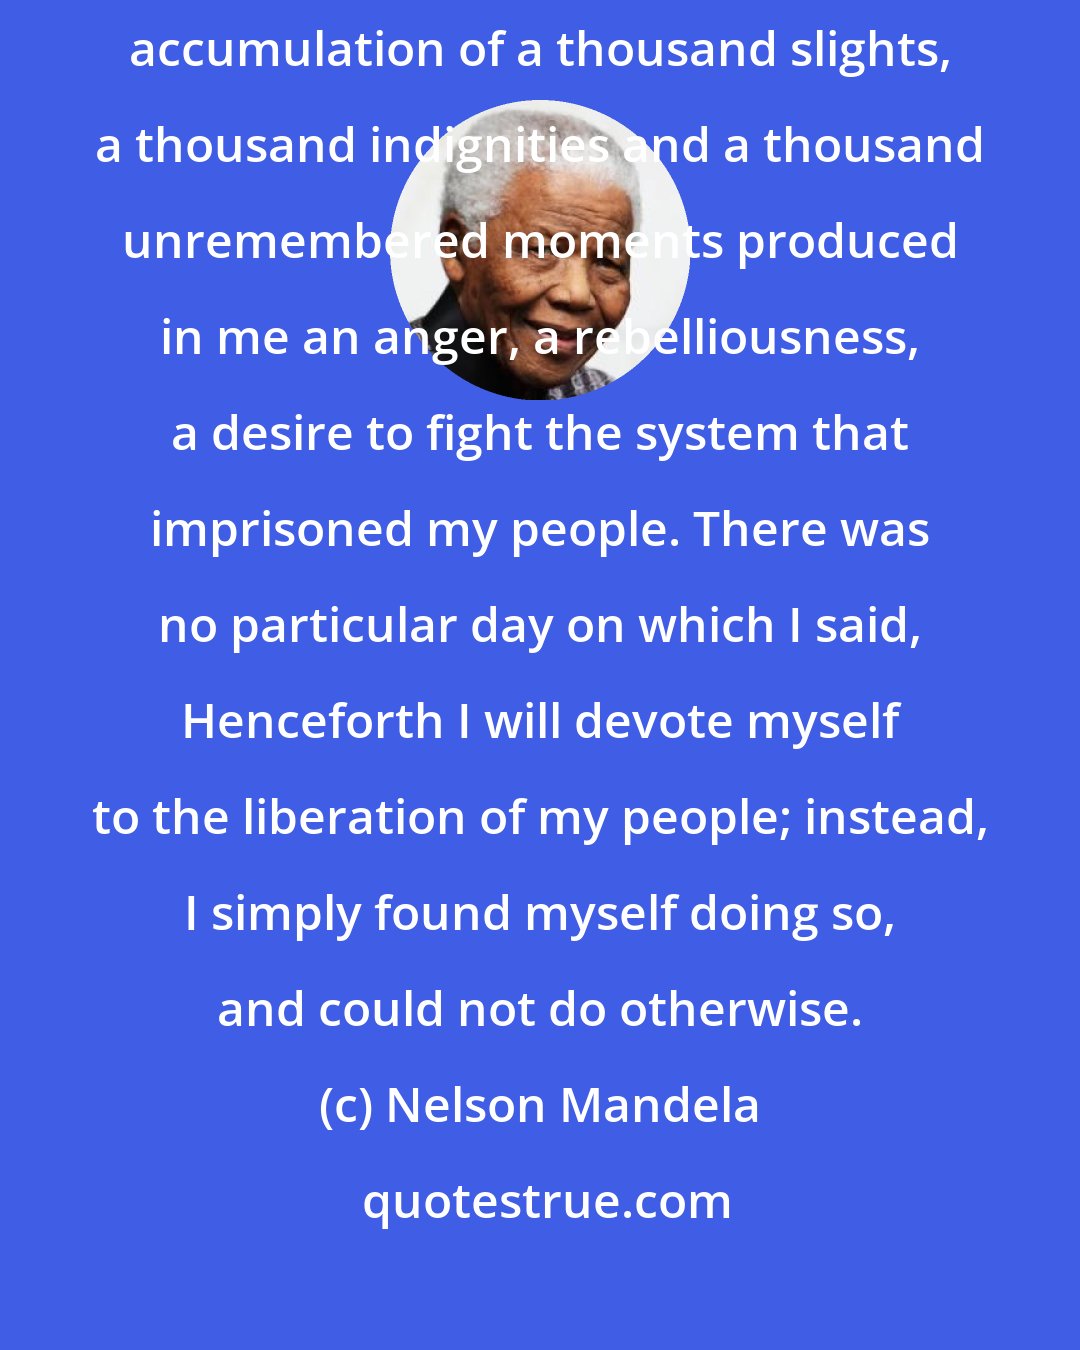 Nelson Mandela: I had no epiphany, no singular revelation, no moment of truth, but a steady accumulation of a thousand slights, a thousand indignities and a thousand unremembered moments produced in me an anger, a rebelliousness, a desire to fight the system that imprisoned my people. There was no particular day on which I said, Henceforth I will devote myself to the liberation of my people; instead, I simply found myself doing so, and could not do otherwise.